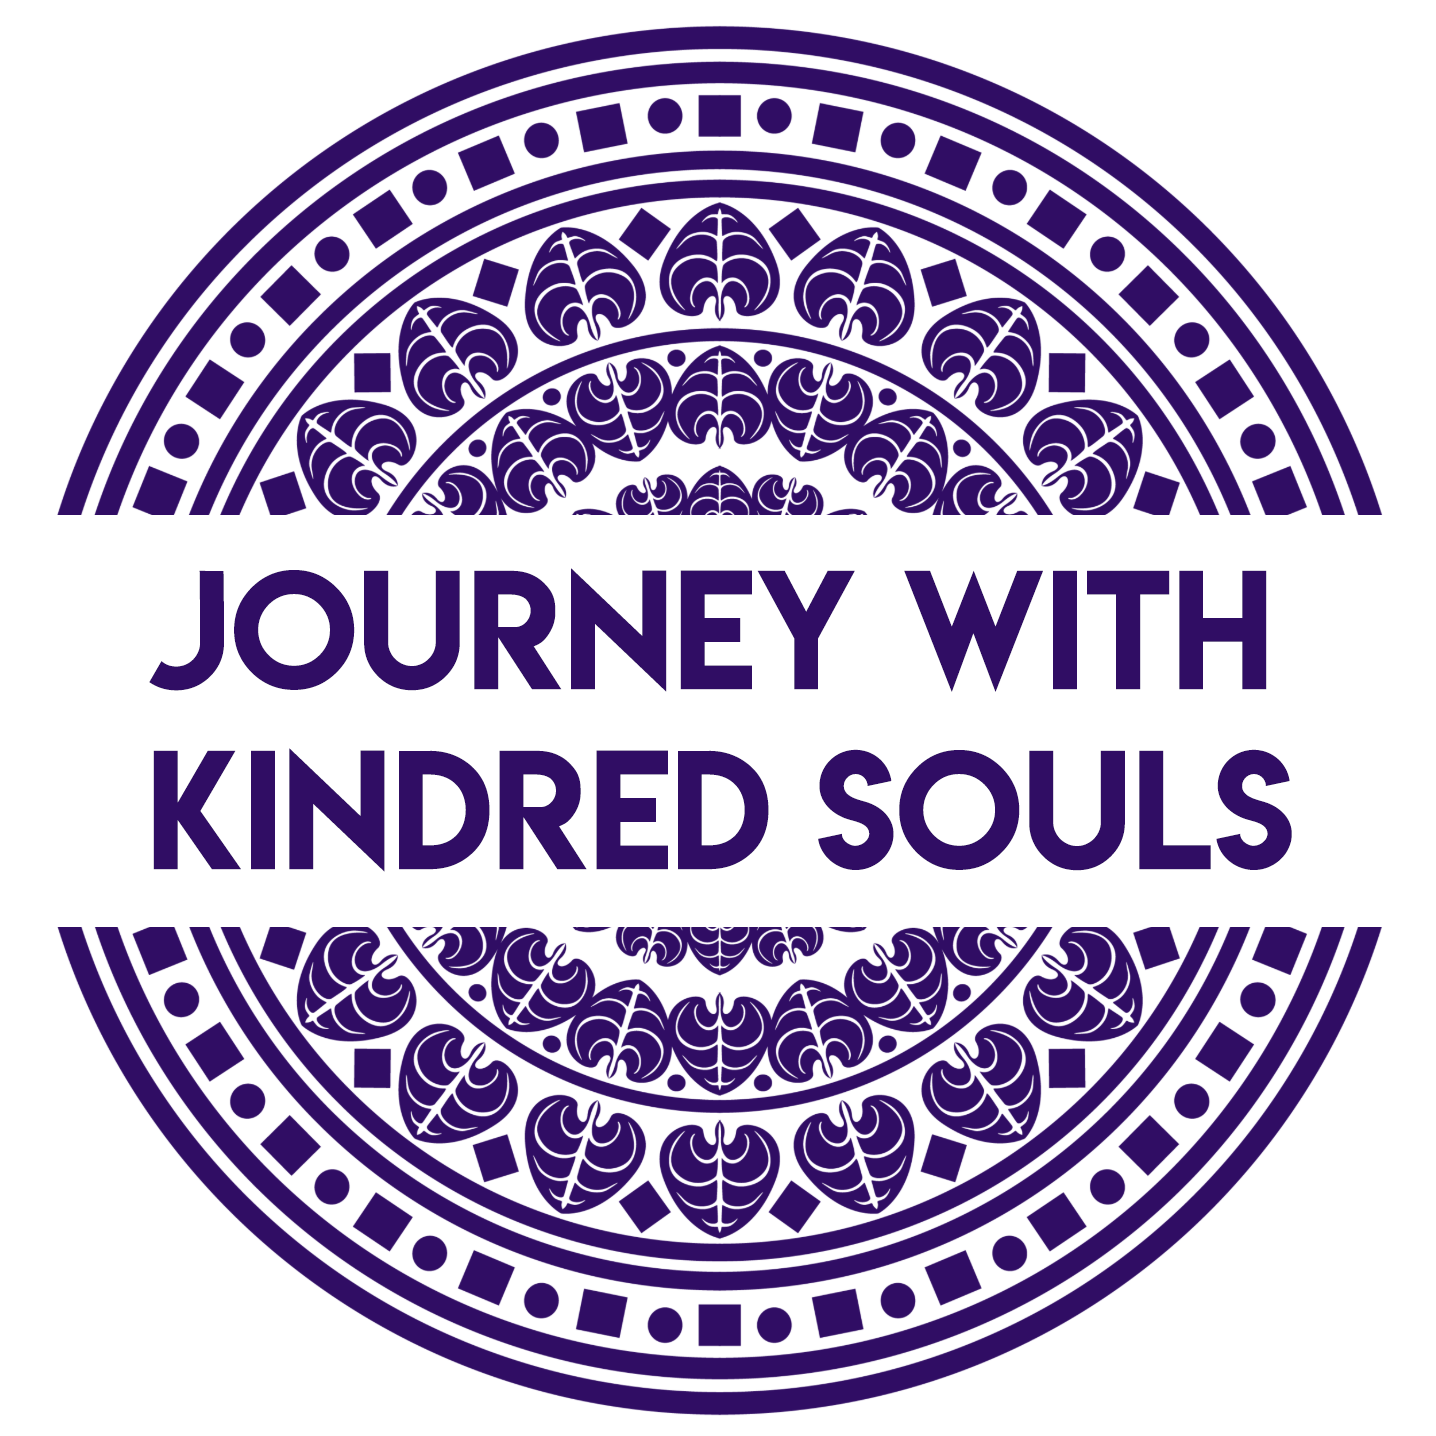 Journey With Kindred Souls LLC